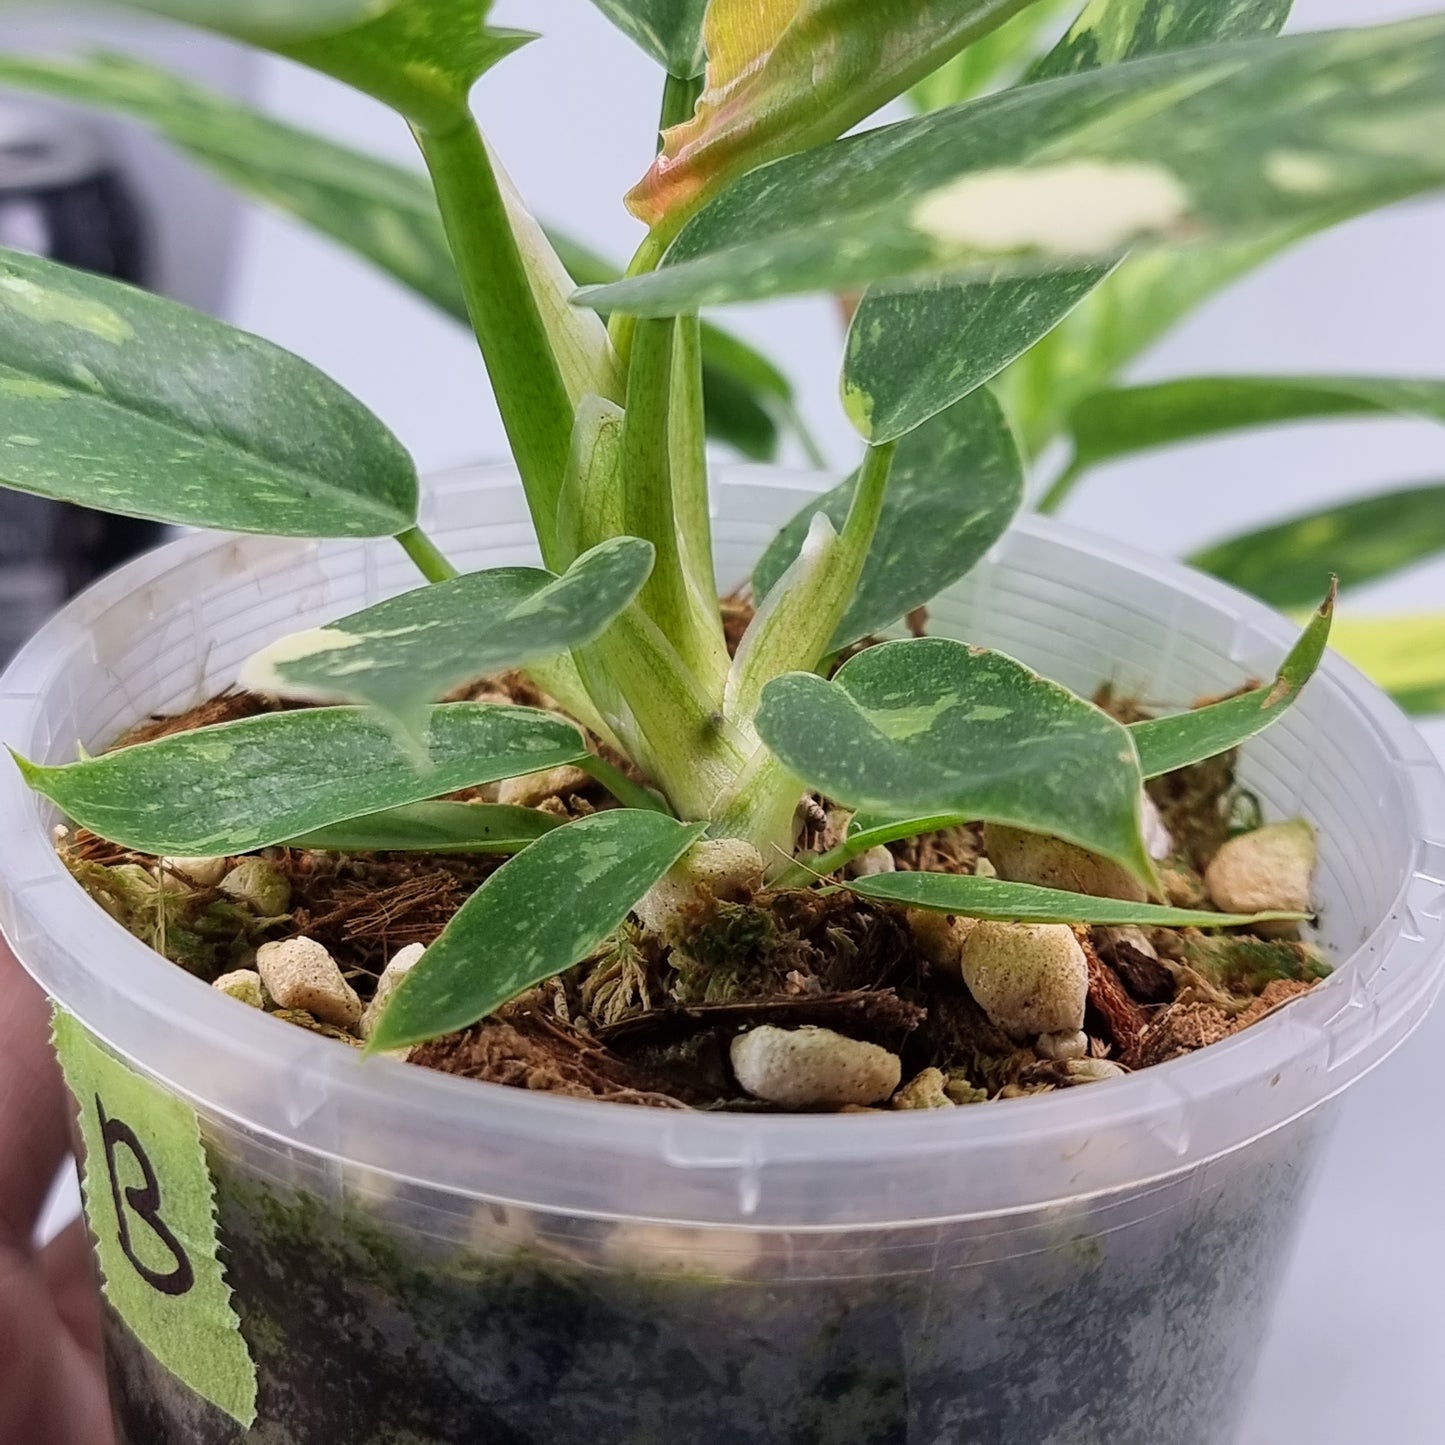 rare Philodendron Ring of Fire for sale in Perth Australia